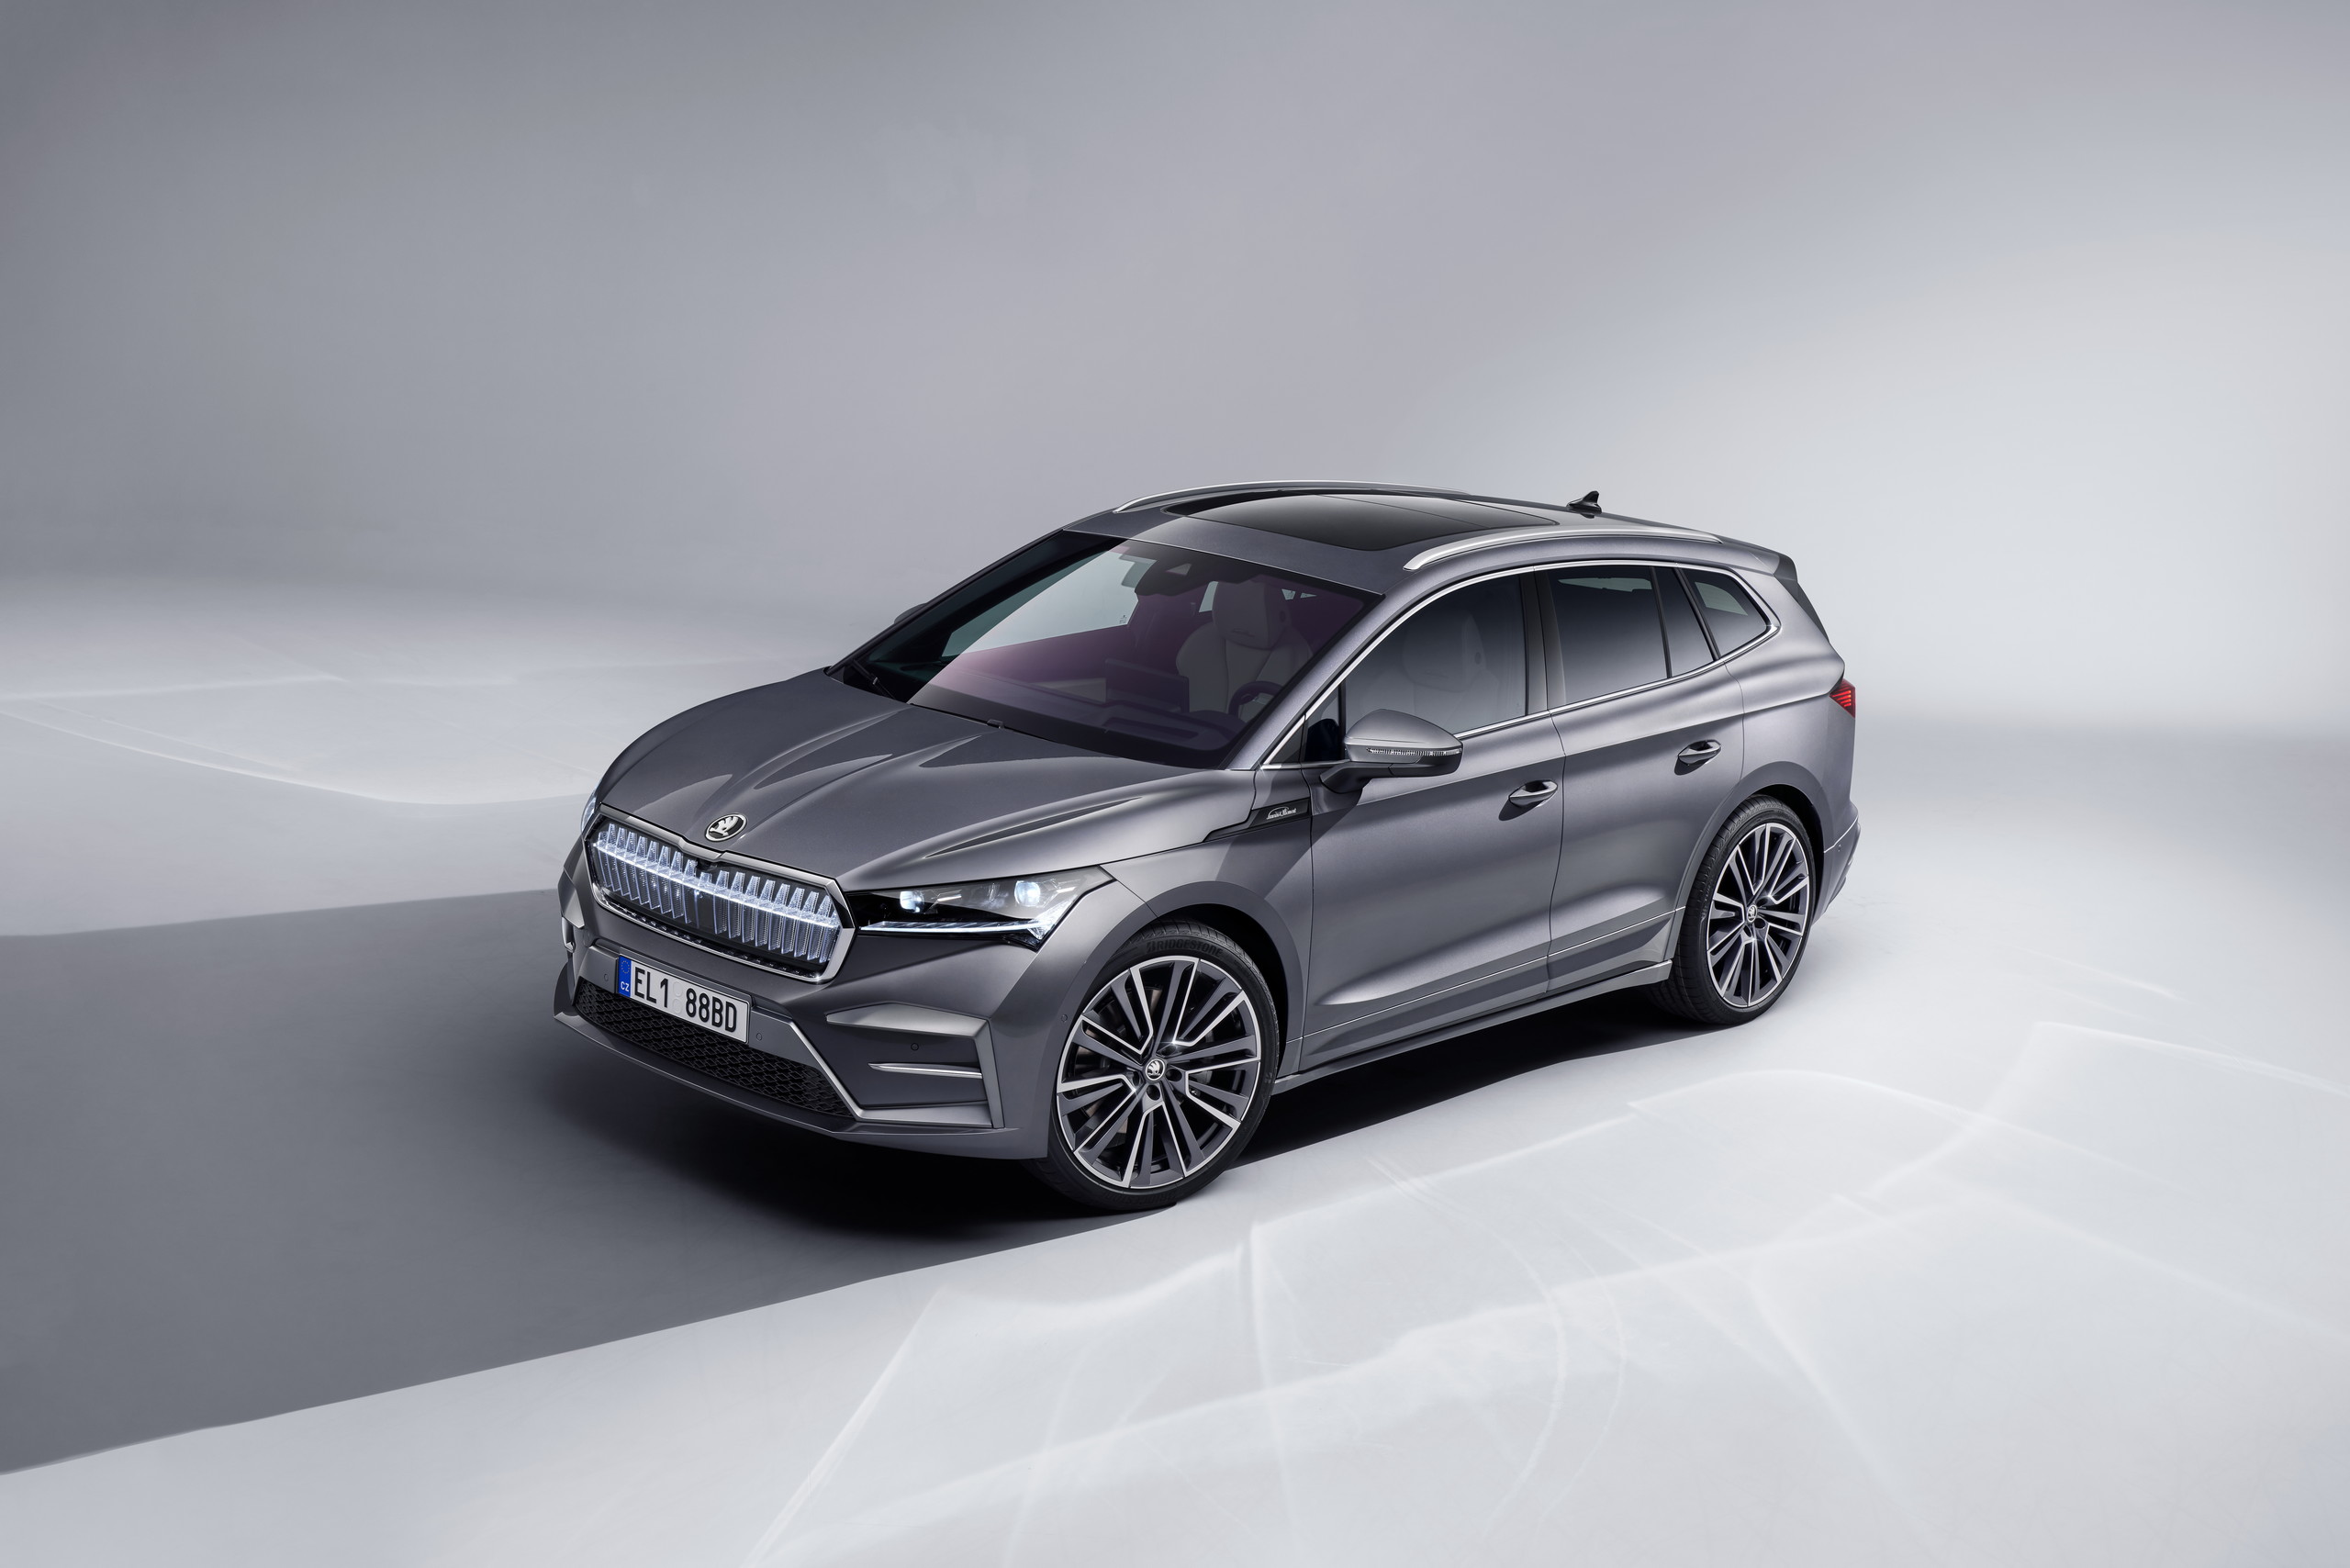 Skoda Enyaq Joins the L&K Family With Premium Upgrades and